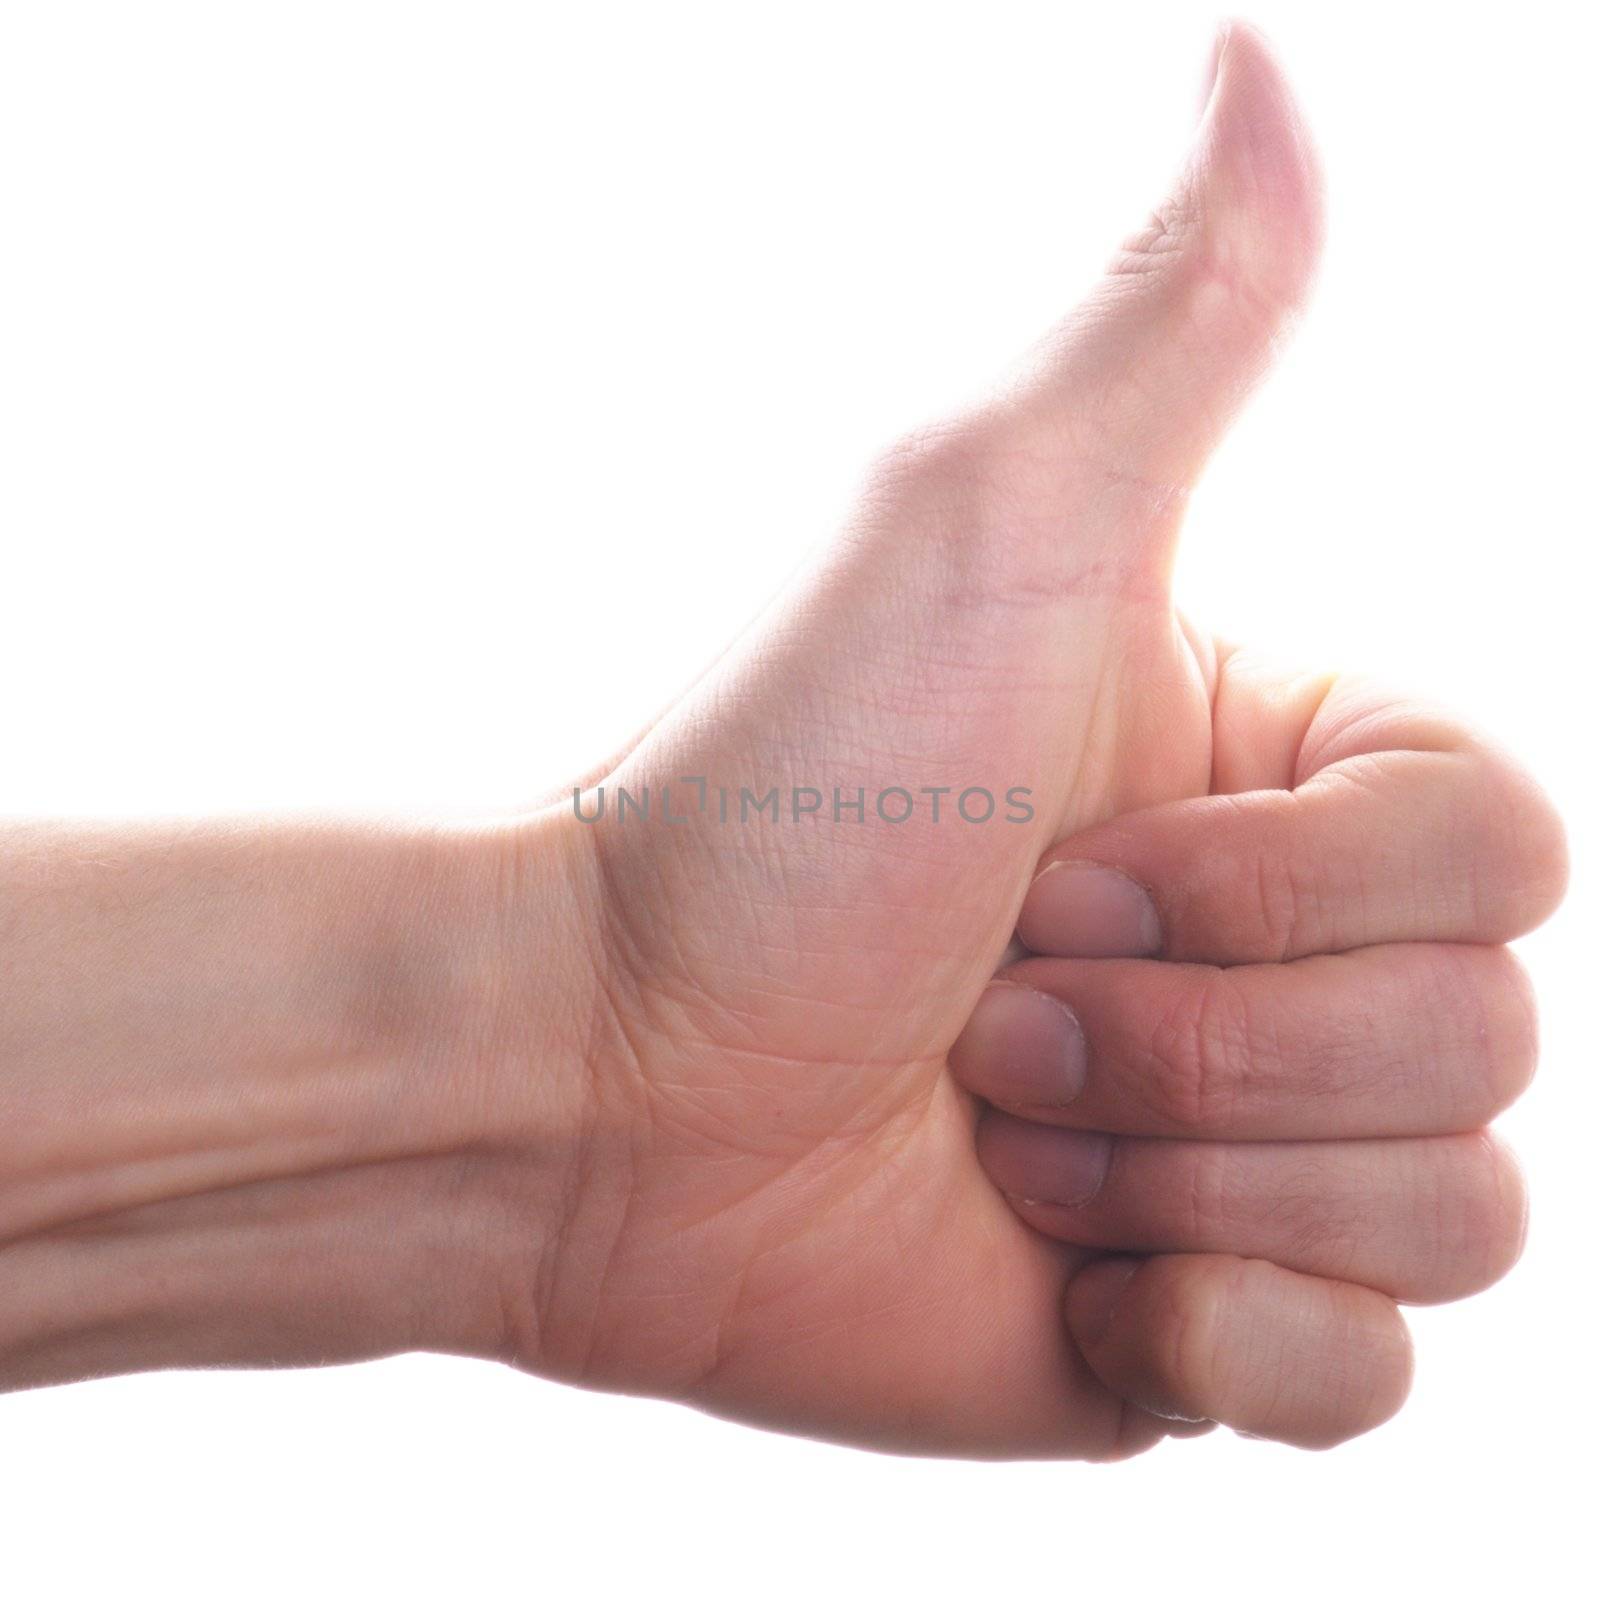 thumbs up or down concept isolated on white background